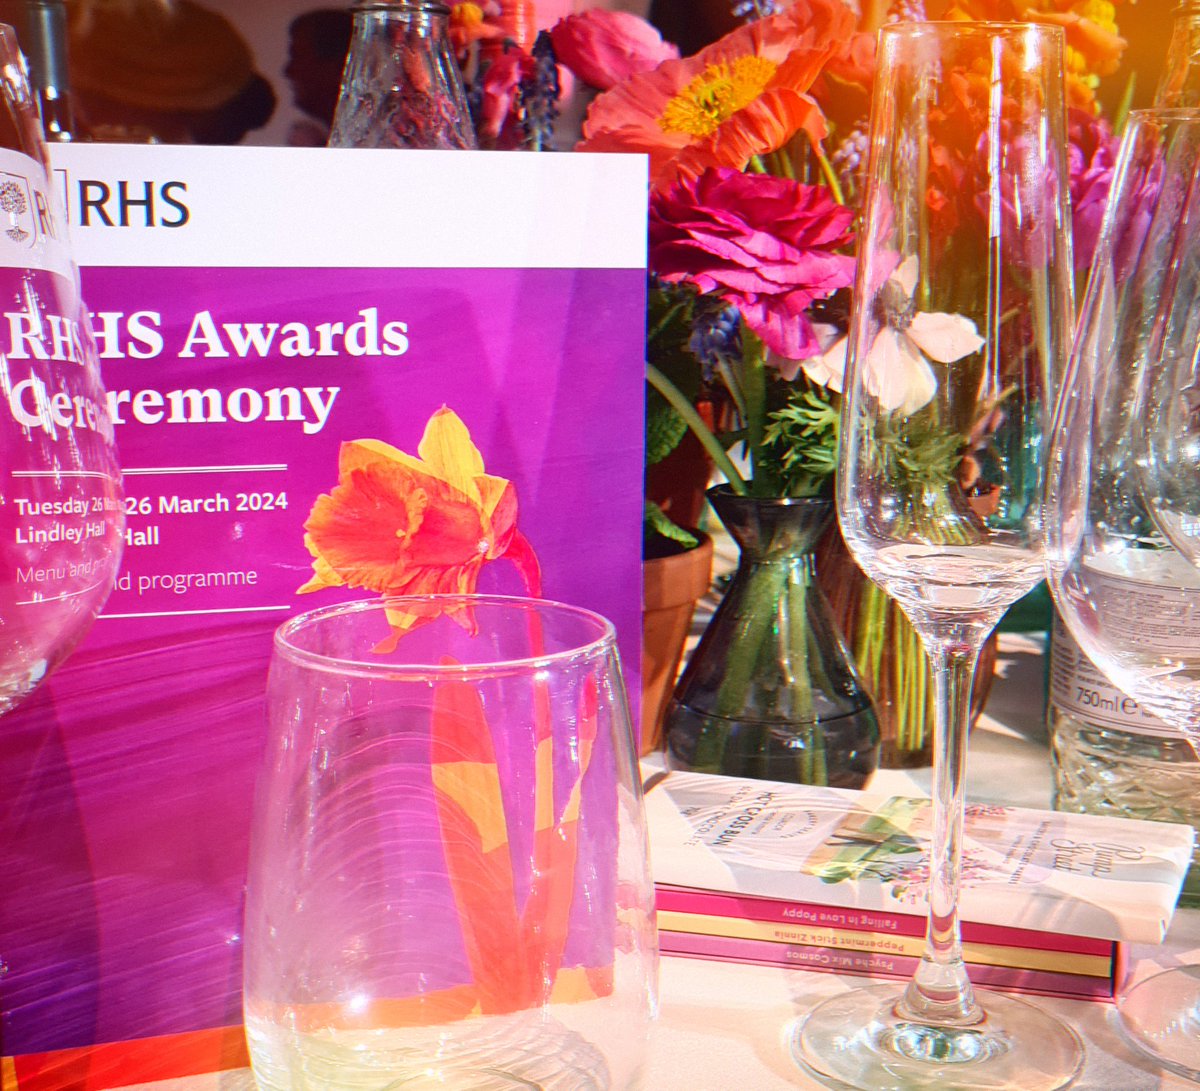 Congratulations to all Master of Horticulture graduates and prize winners at the @the_rhs awards ceremony! SO MANY brains in the room. This year we had graduates from all over the world including Singapore, Hong Kong and Colombia. So inspiring to hear about everyone's projects 🤩